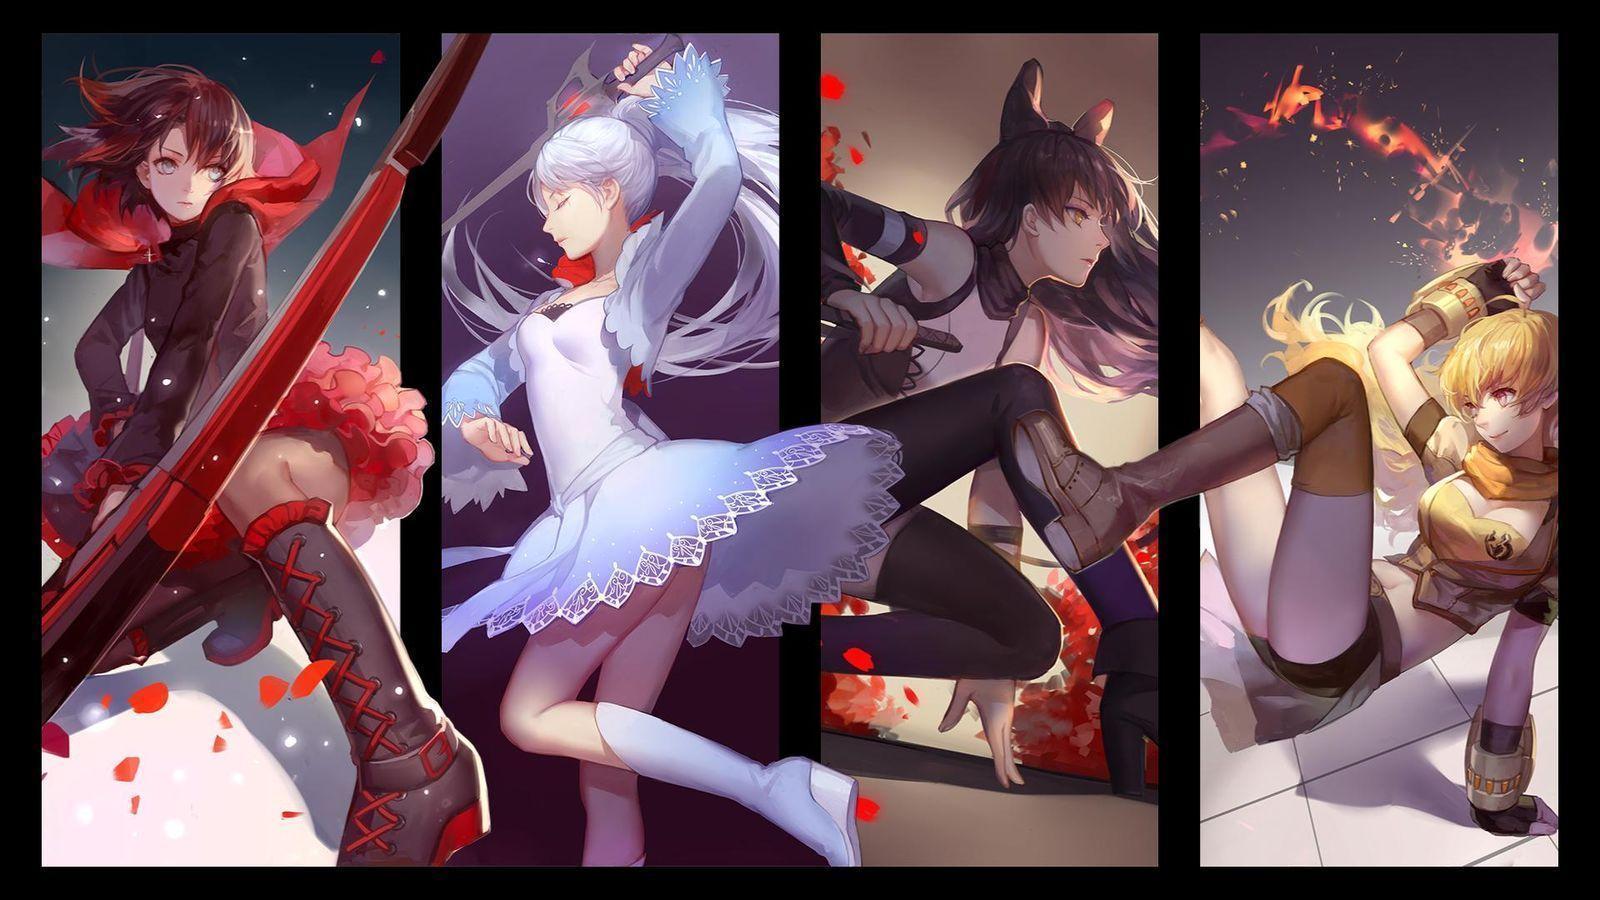 RWBY Wallpaper, Picture, Image 1366x768 and other